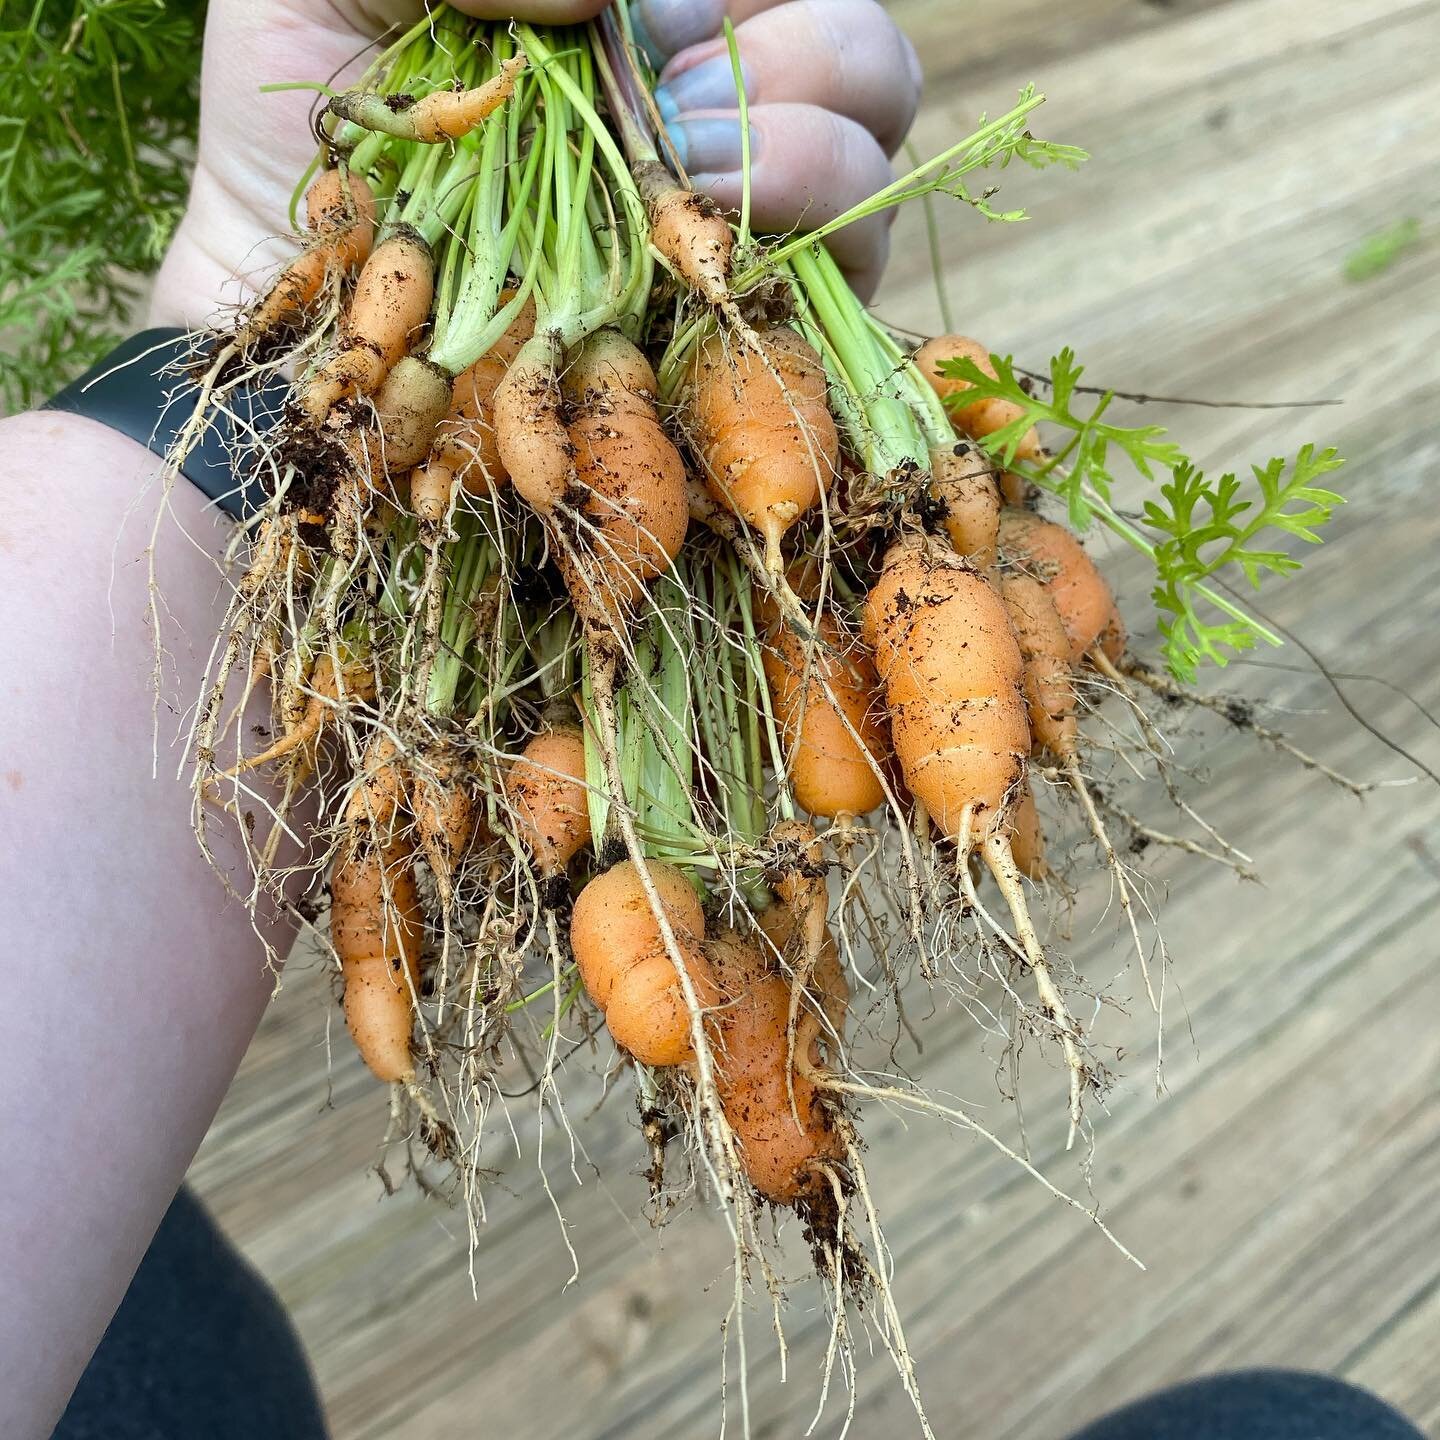 #latergram Harvested the carrots last week :)